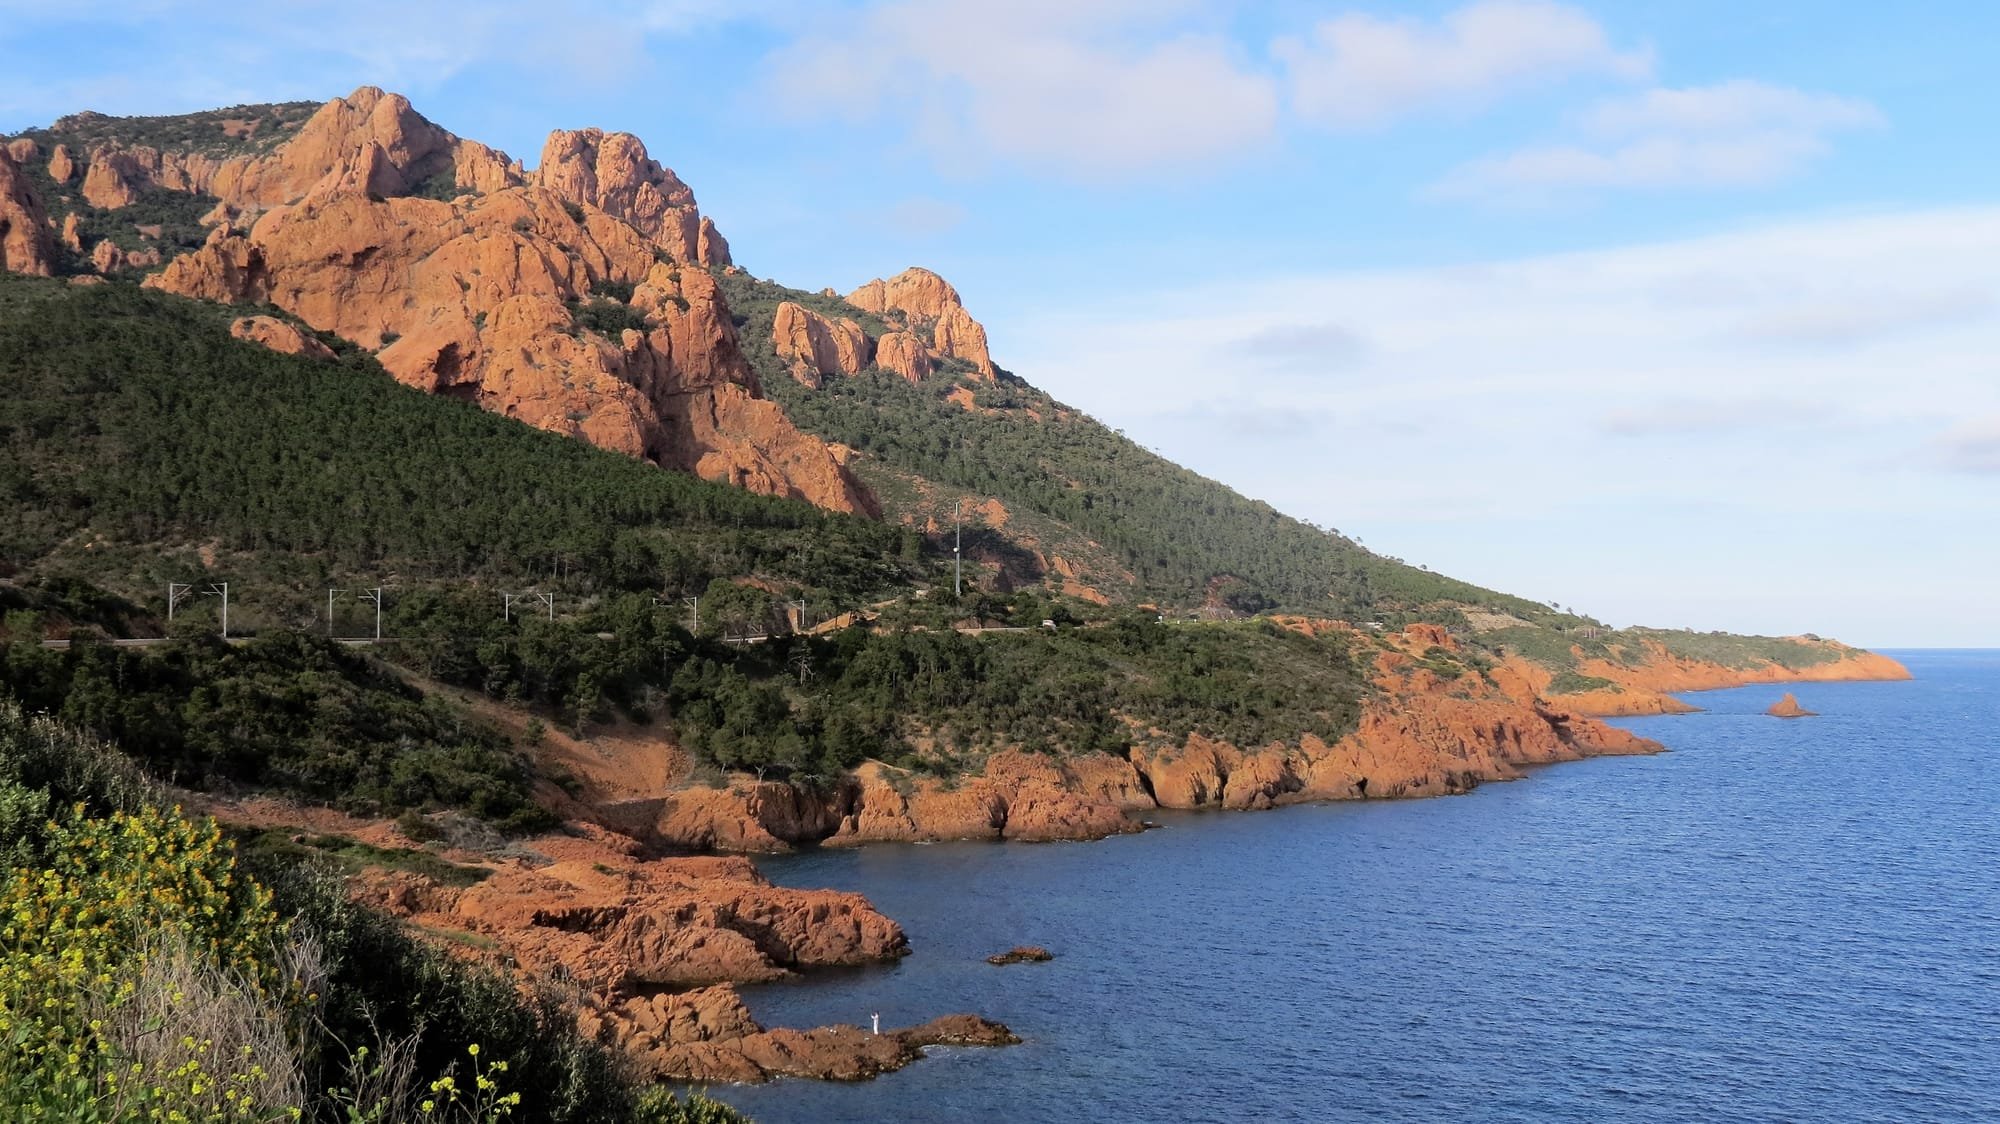 View on the Esterel